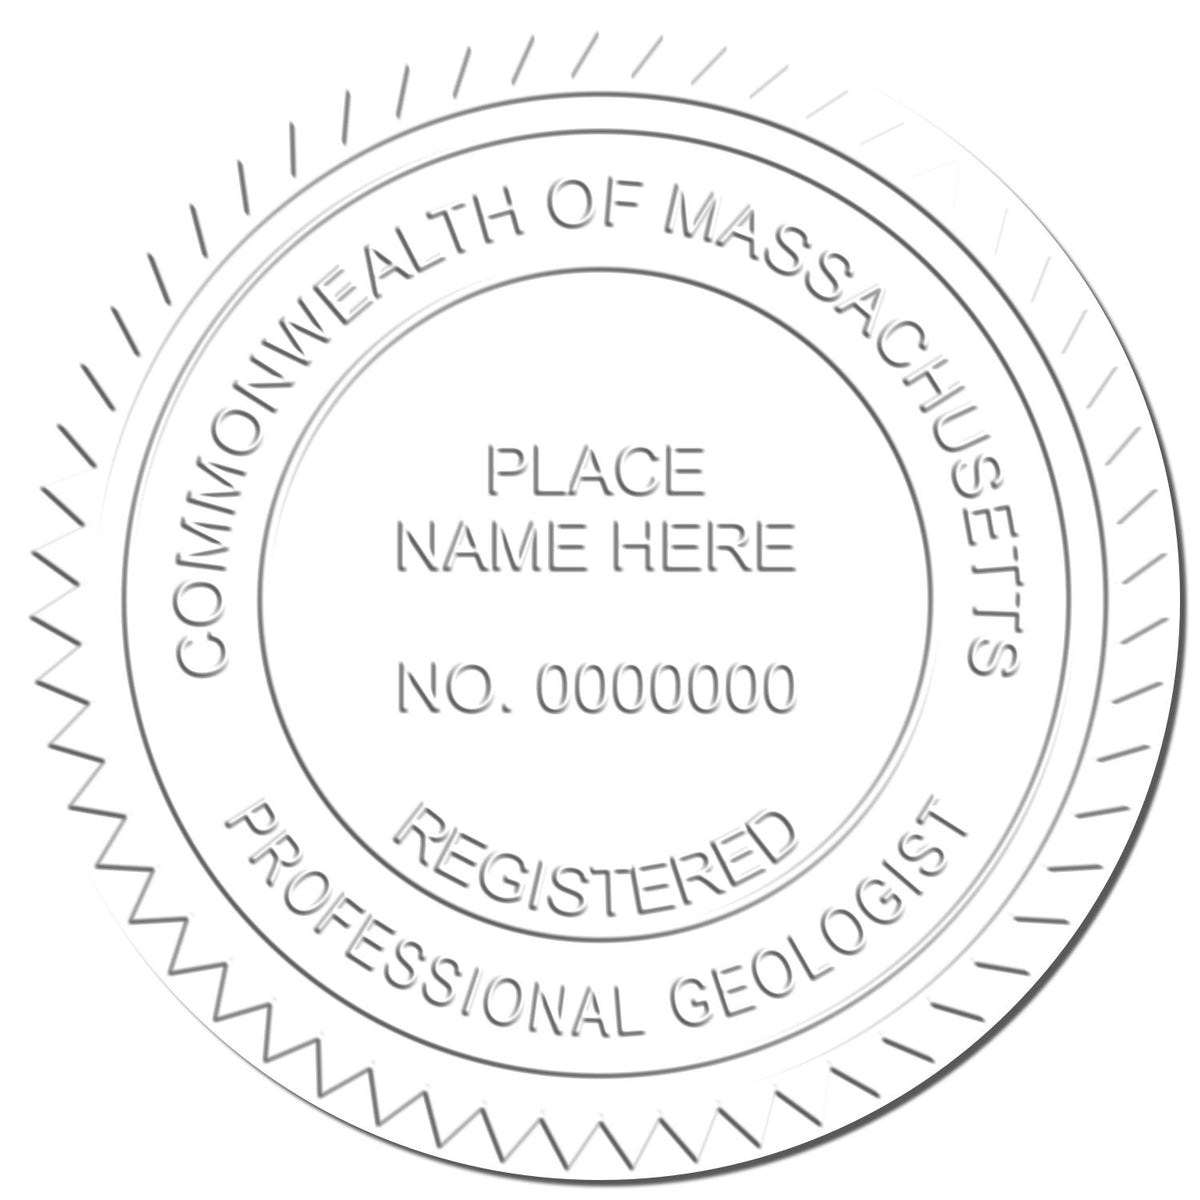 A photograph of the State of Massachusetts Extended Long Reach Geologist Seal stamp impression reveals a vivid, professional image of the on paper.